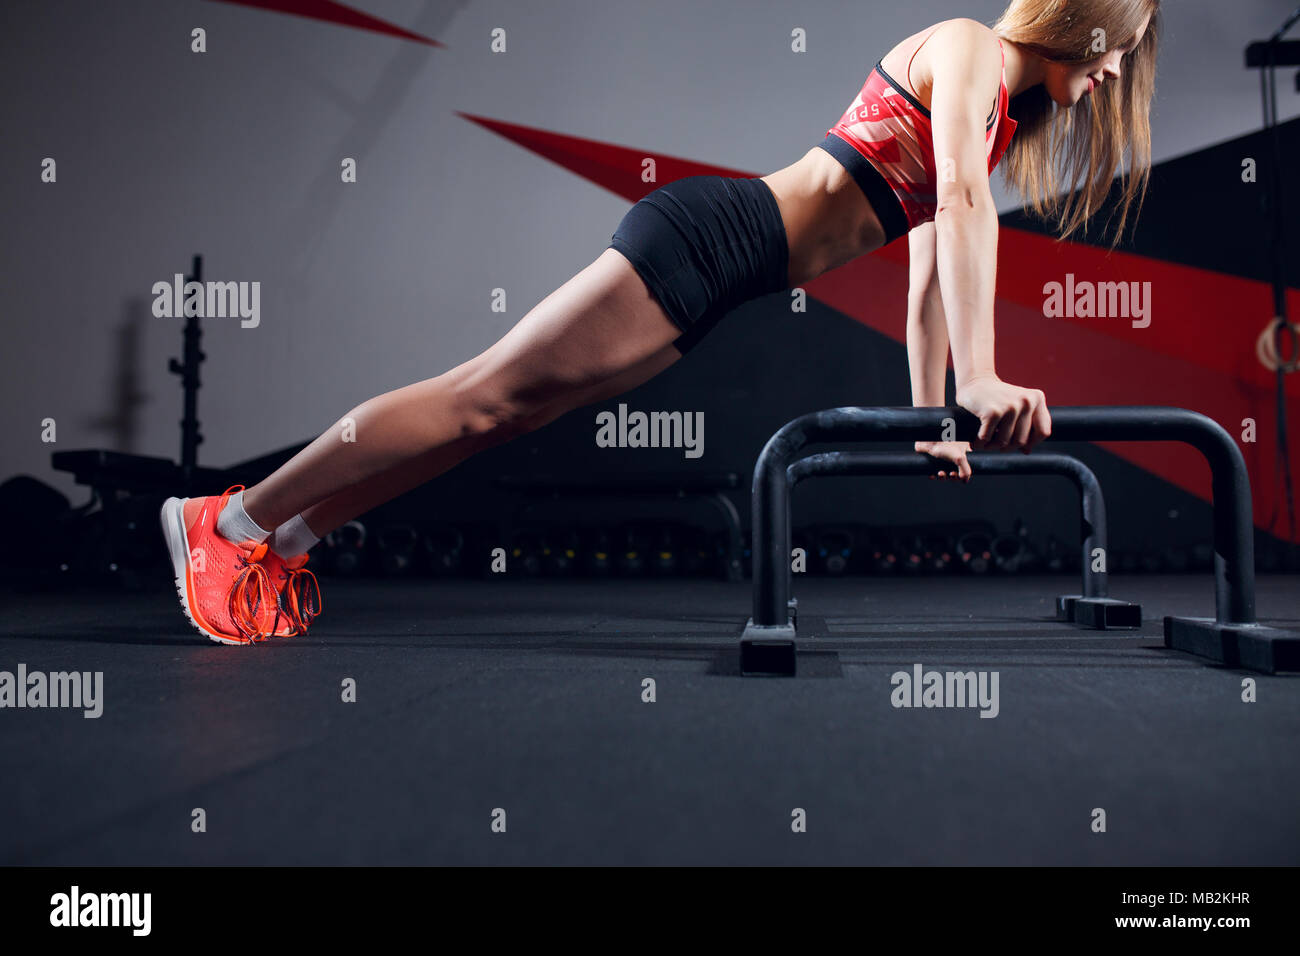 Muscular Female Athlete Wearing Red Sports Stock Photo 1131448475